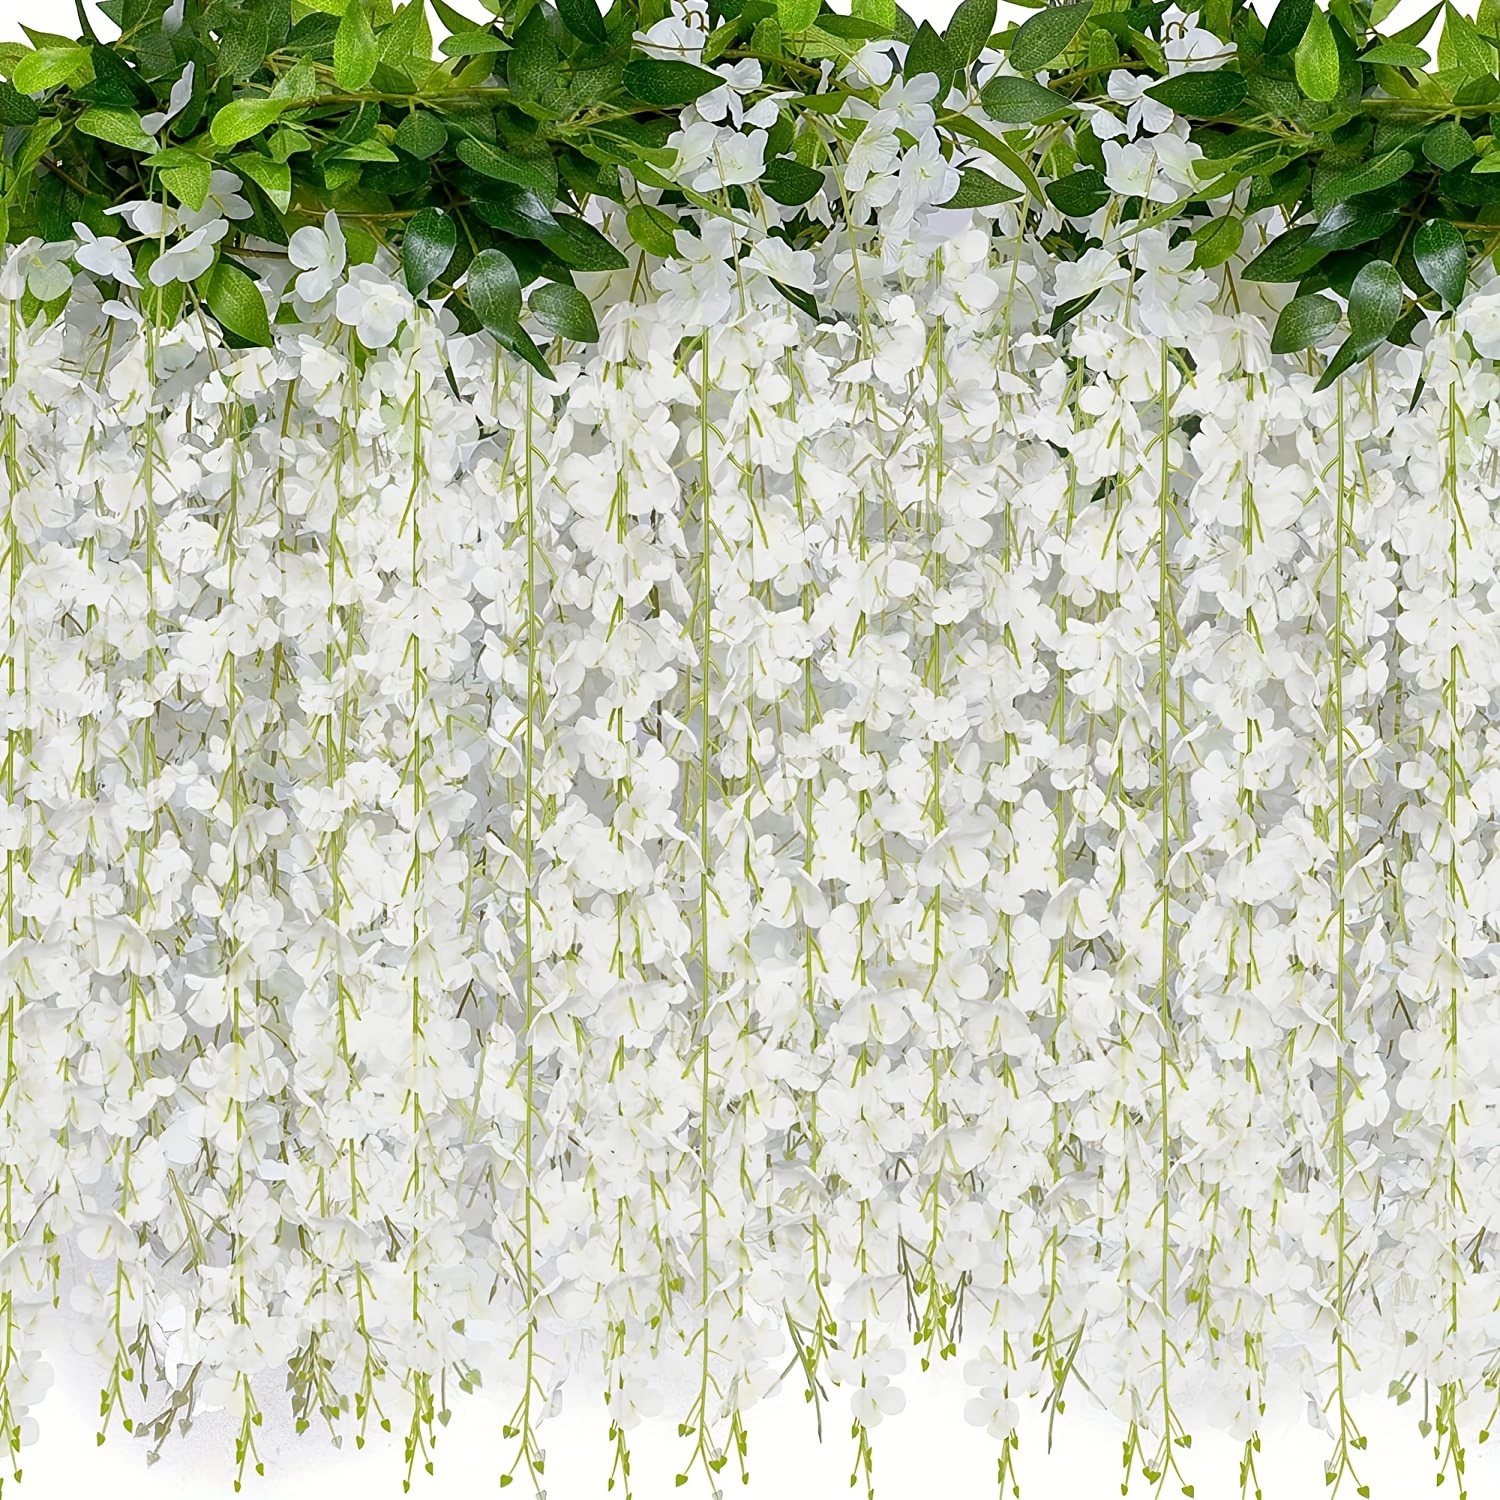 

6 Feet 12 Branches White Wisteria Hanging Flowers Artificial Wisteria Vine Silk Wisteria Flowers Garland For Wedding Arch Party Garden Home Decor